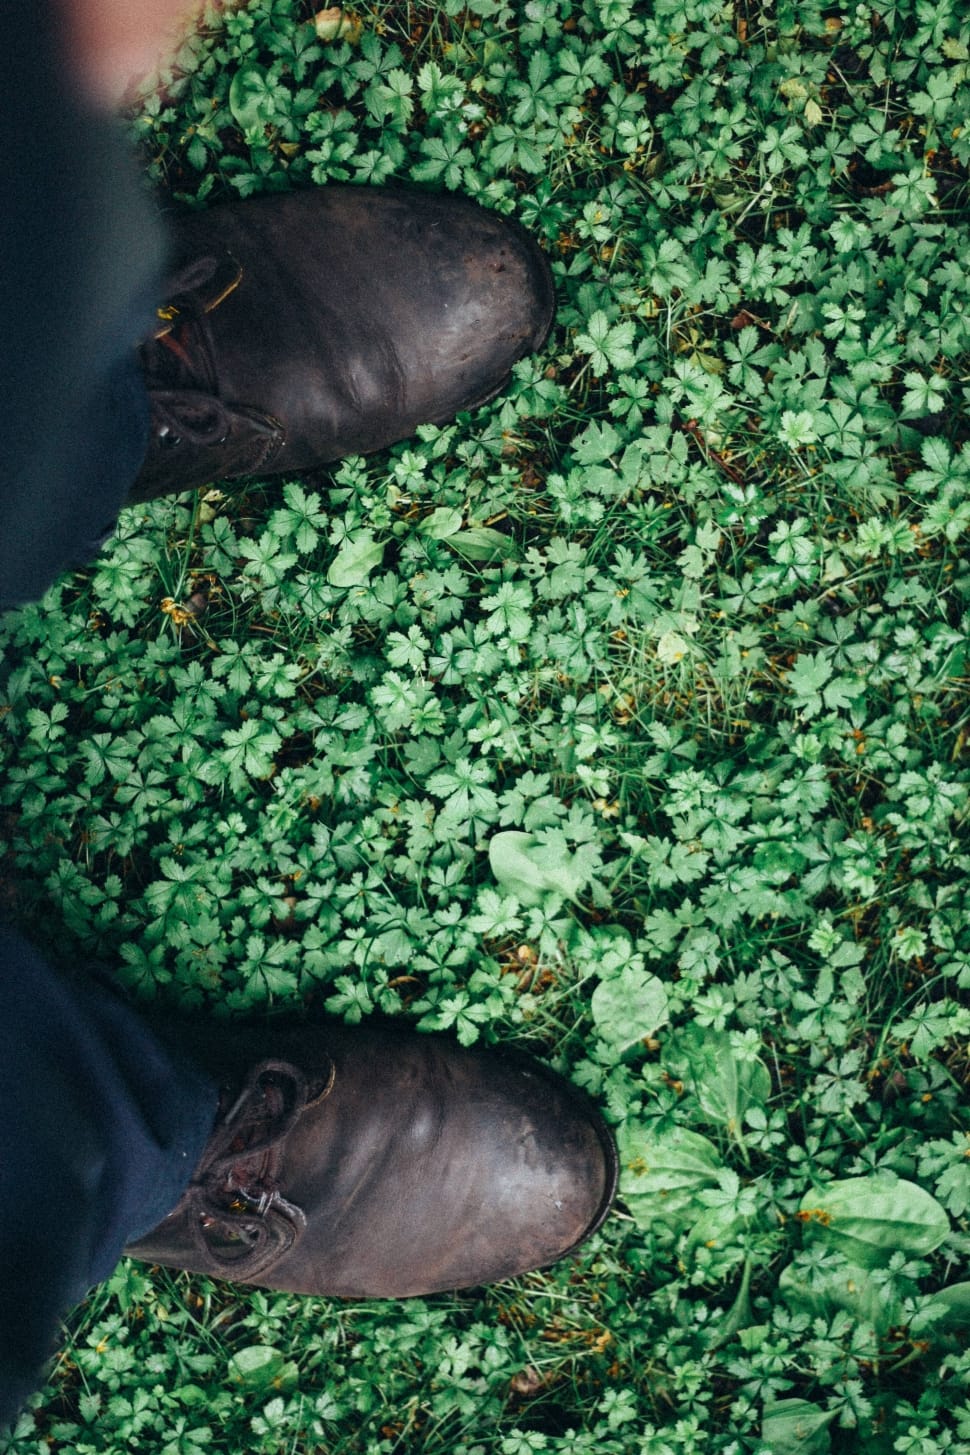 human pair of black dress shoes standing in green leaf grass preview